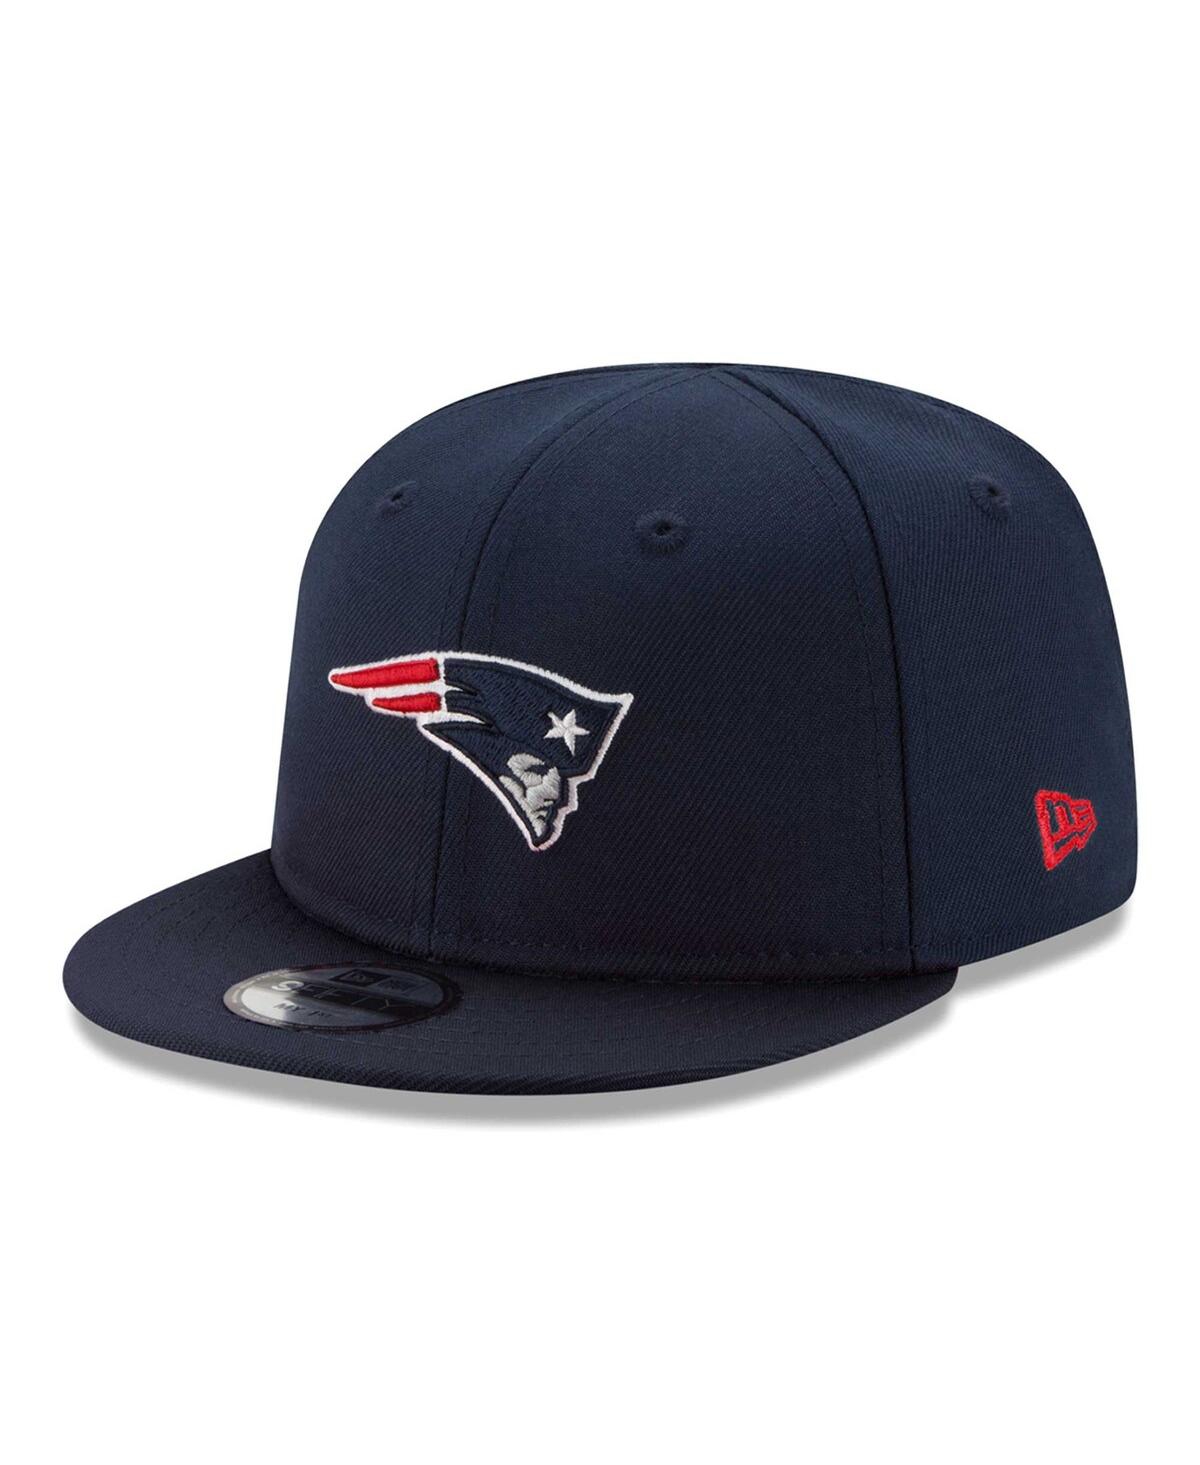 Shop New Era Baby Boys And Girls  Navy New England Patriots My 1st 9fifty Adjustable Hat